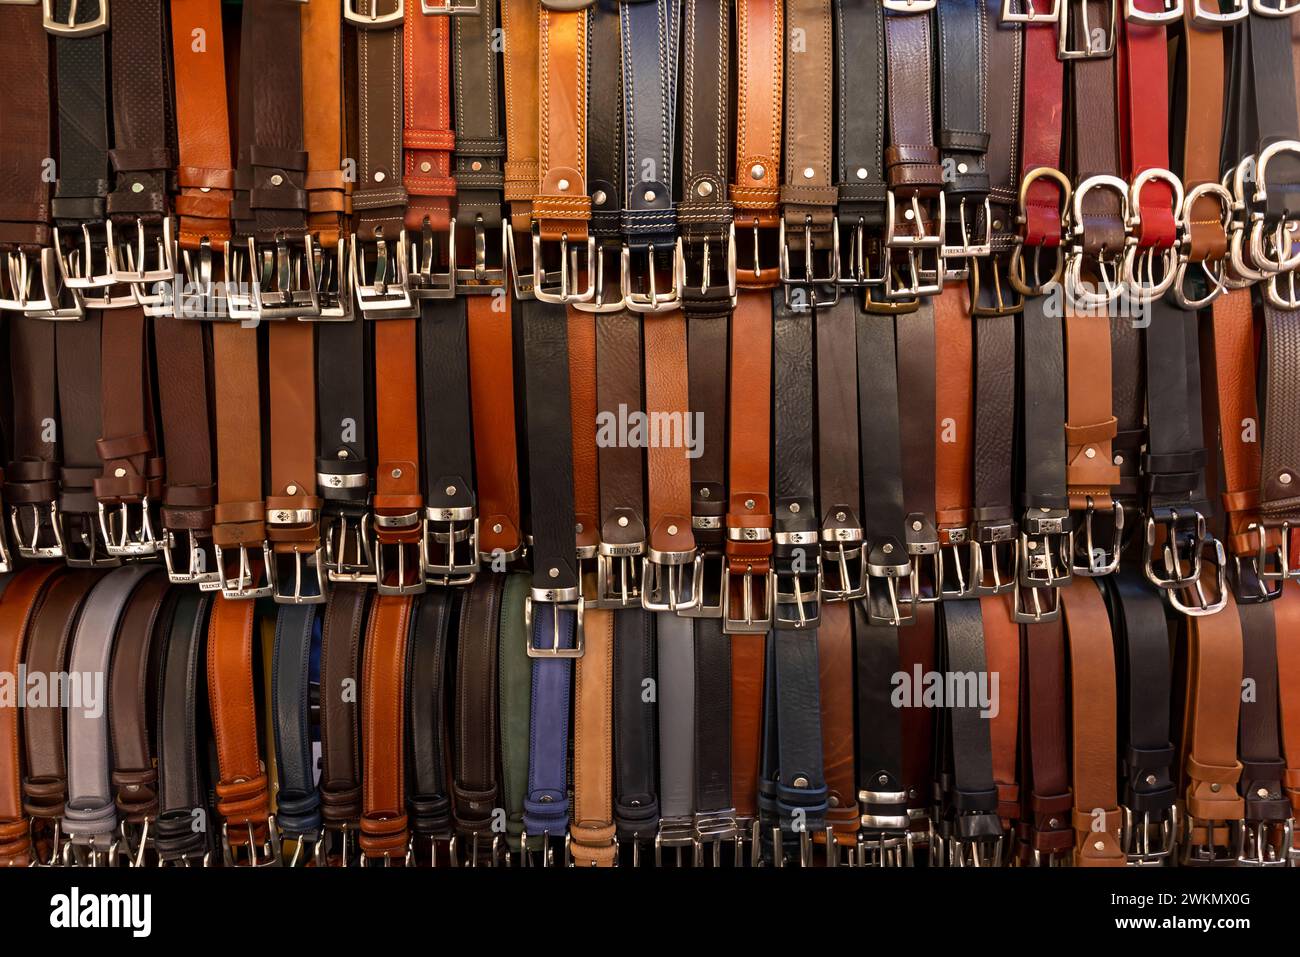 The San Lorenzo leather market, an outdoor market lined with fine leather goods from Florence, draws travelers from around the world as well as locals Stock Photo